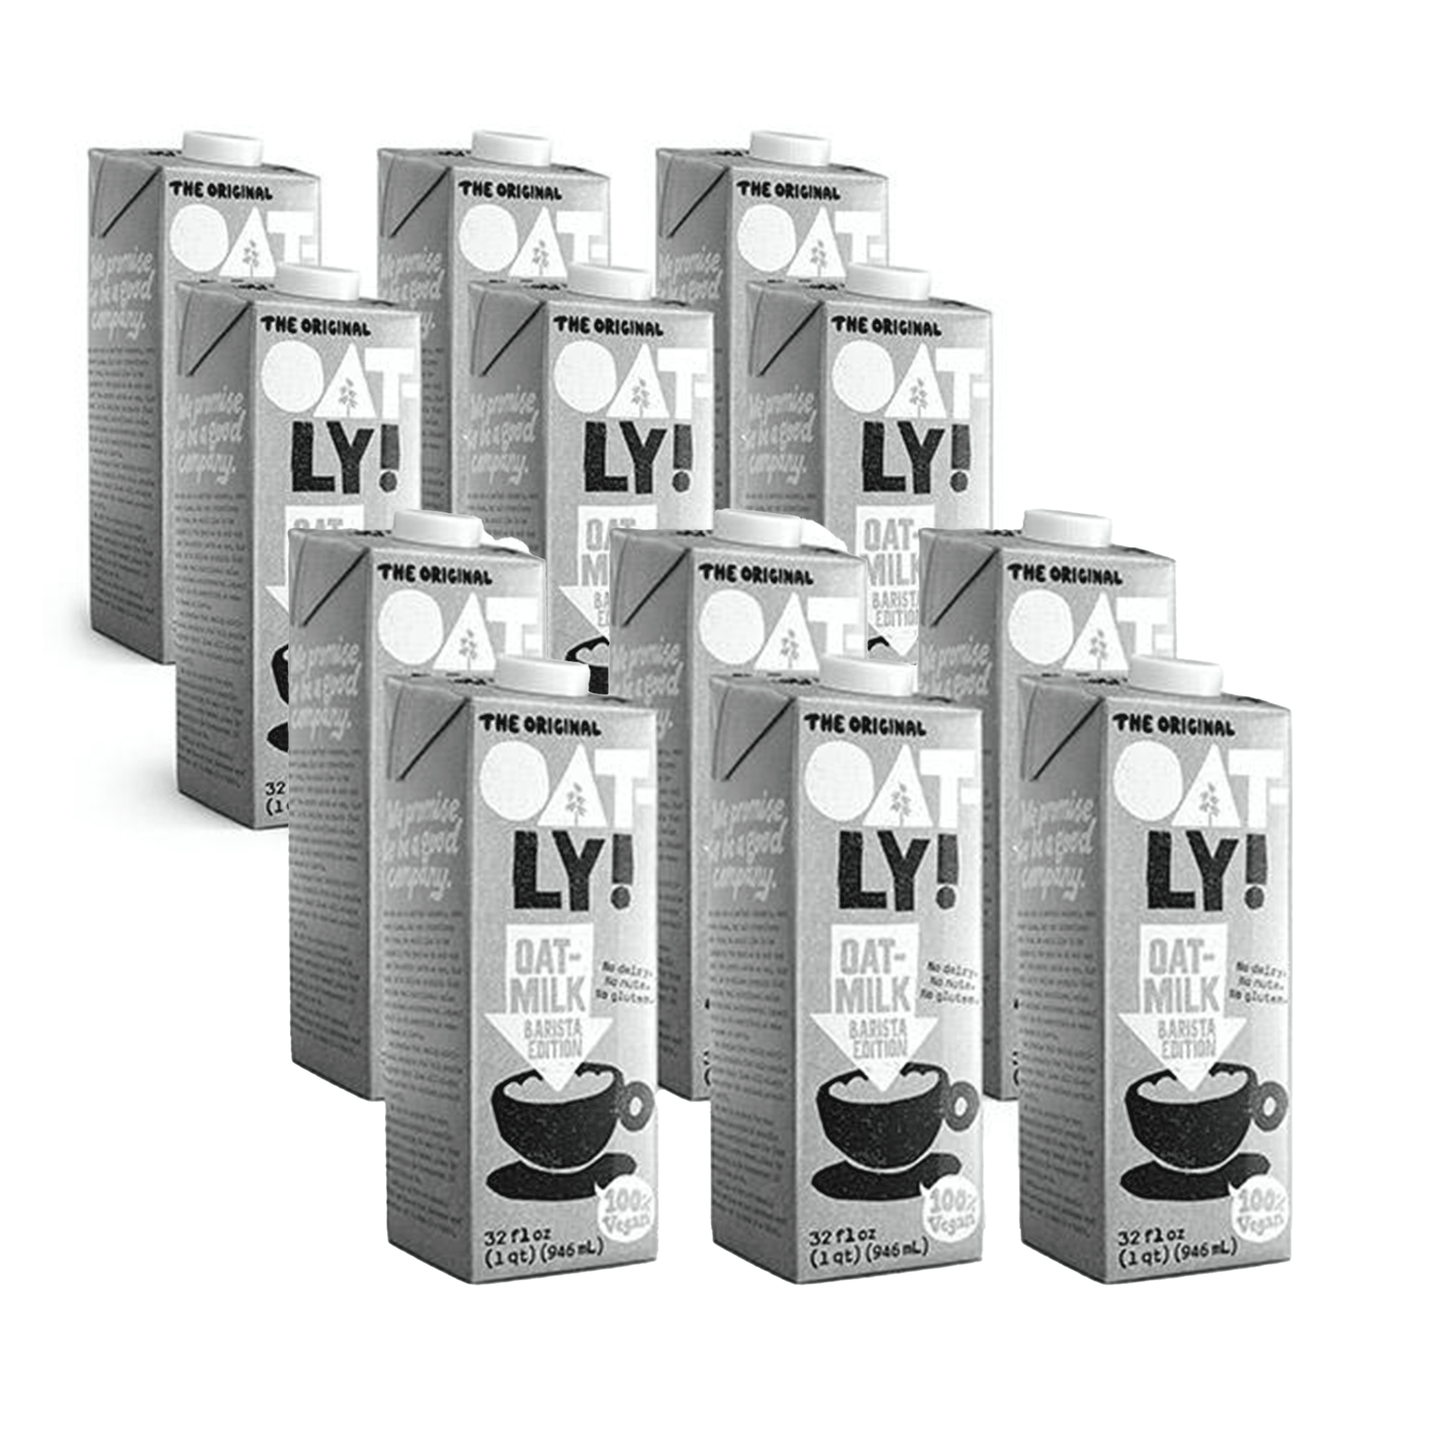 Oatly Barista Edition Oat Milk - 2 cases of 12, 32oz cartons (24 total)